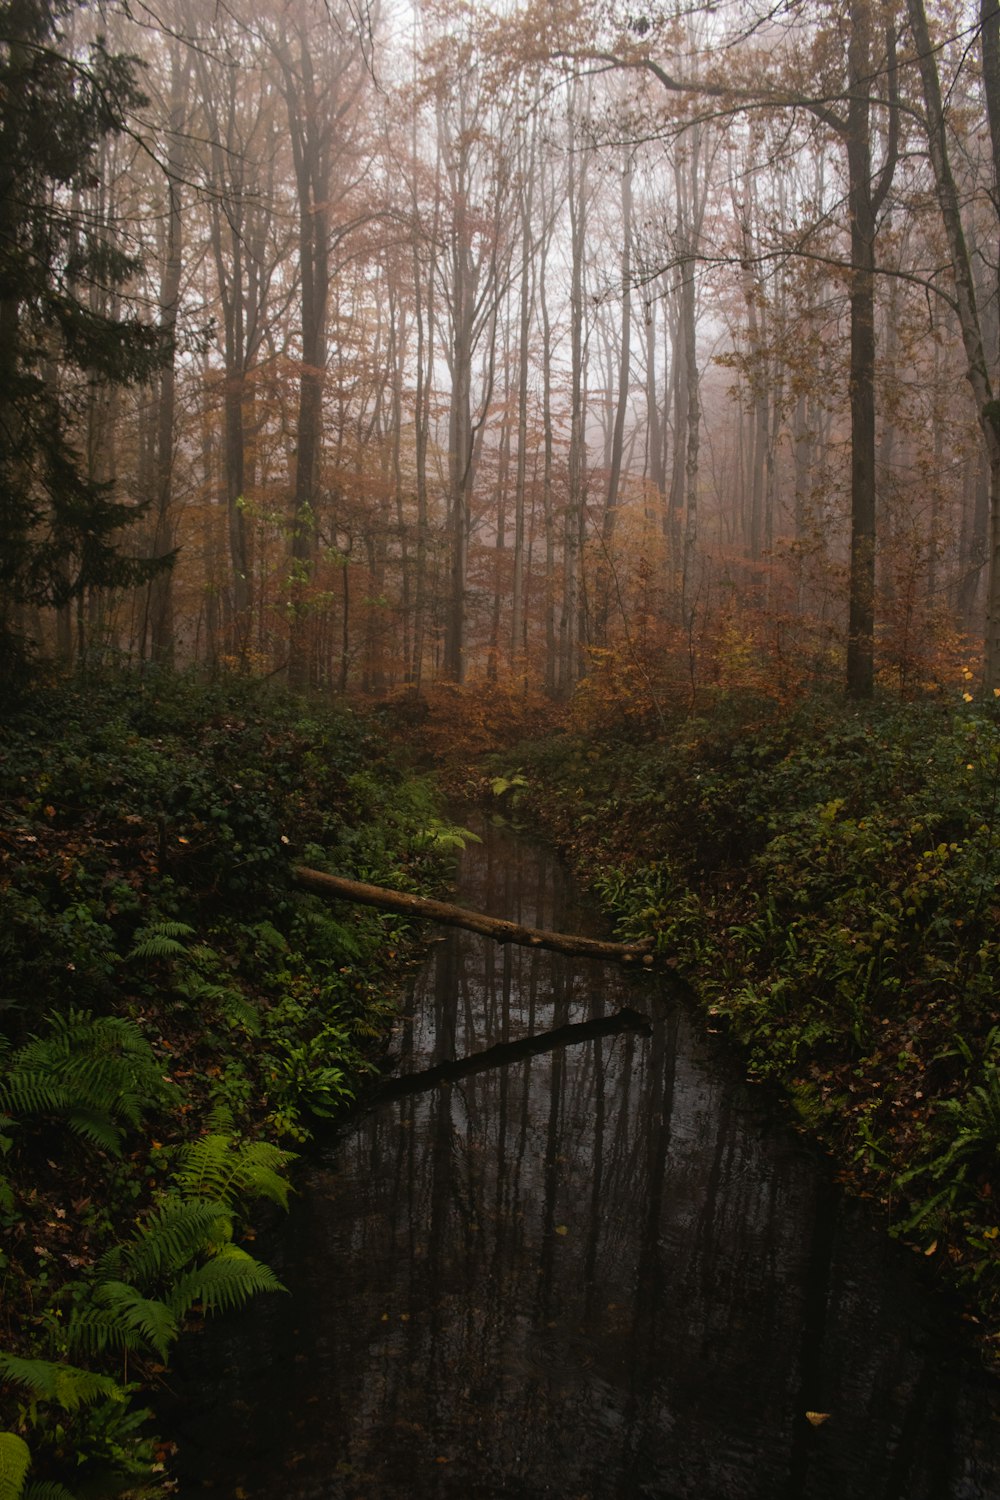 a stream running through a forest filled with lots of trees